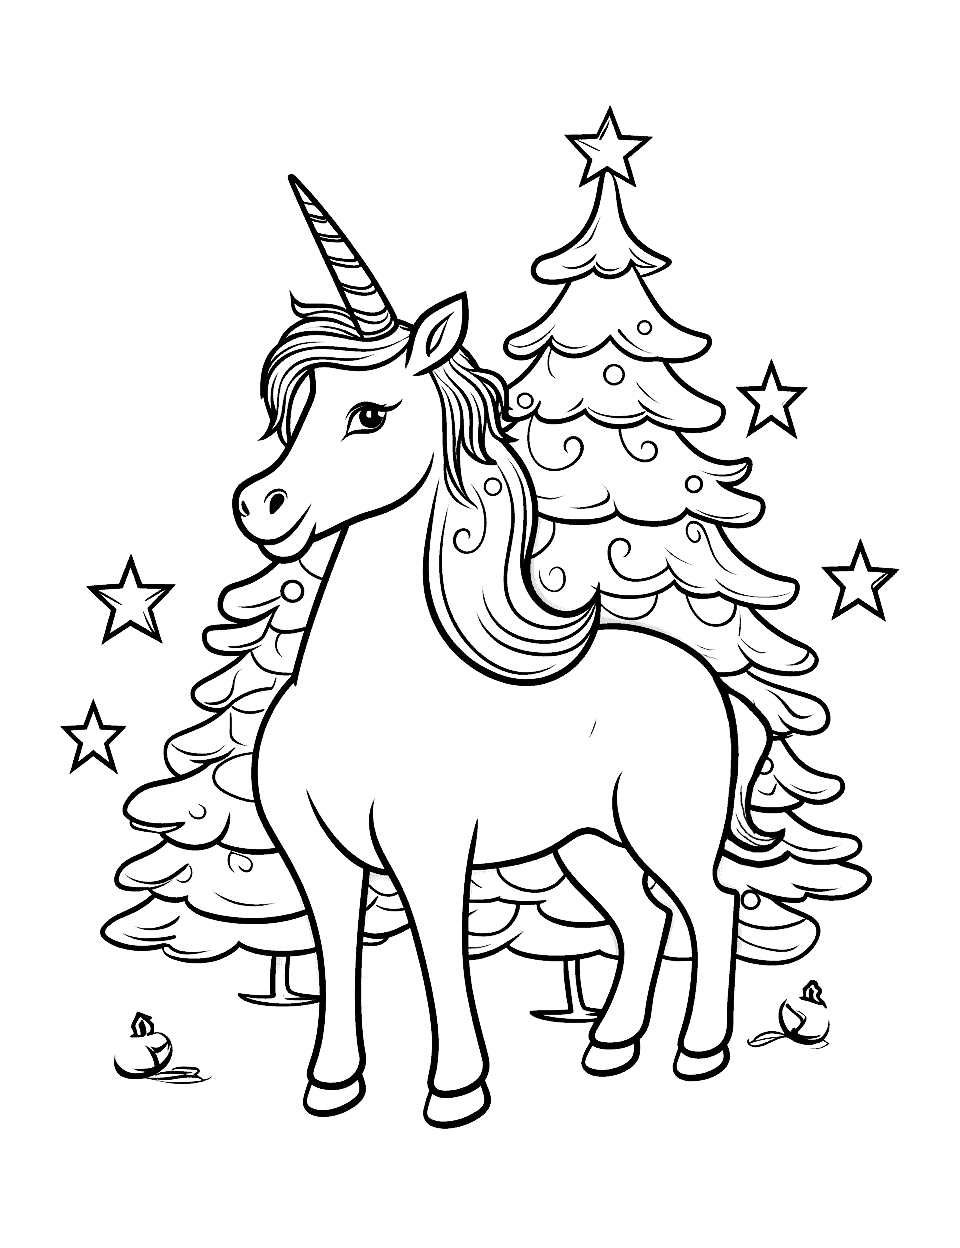 Unicorn and Christmas Tree Coloring Page - A unicorn with a beautiful Christmas tree.